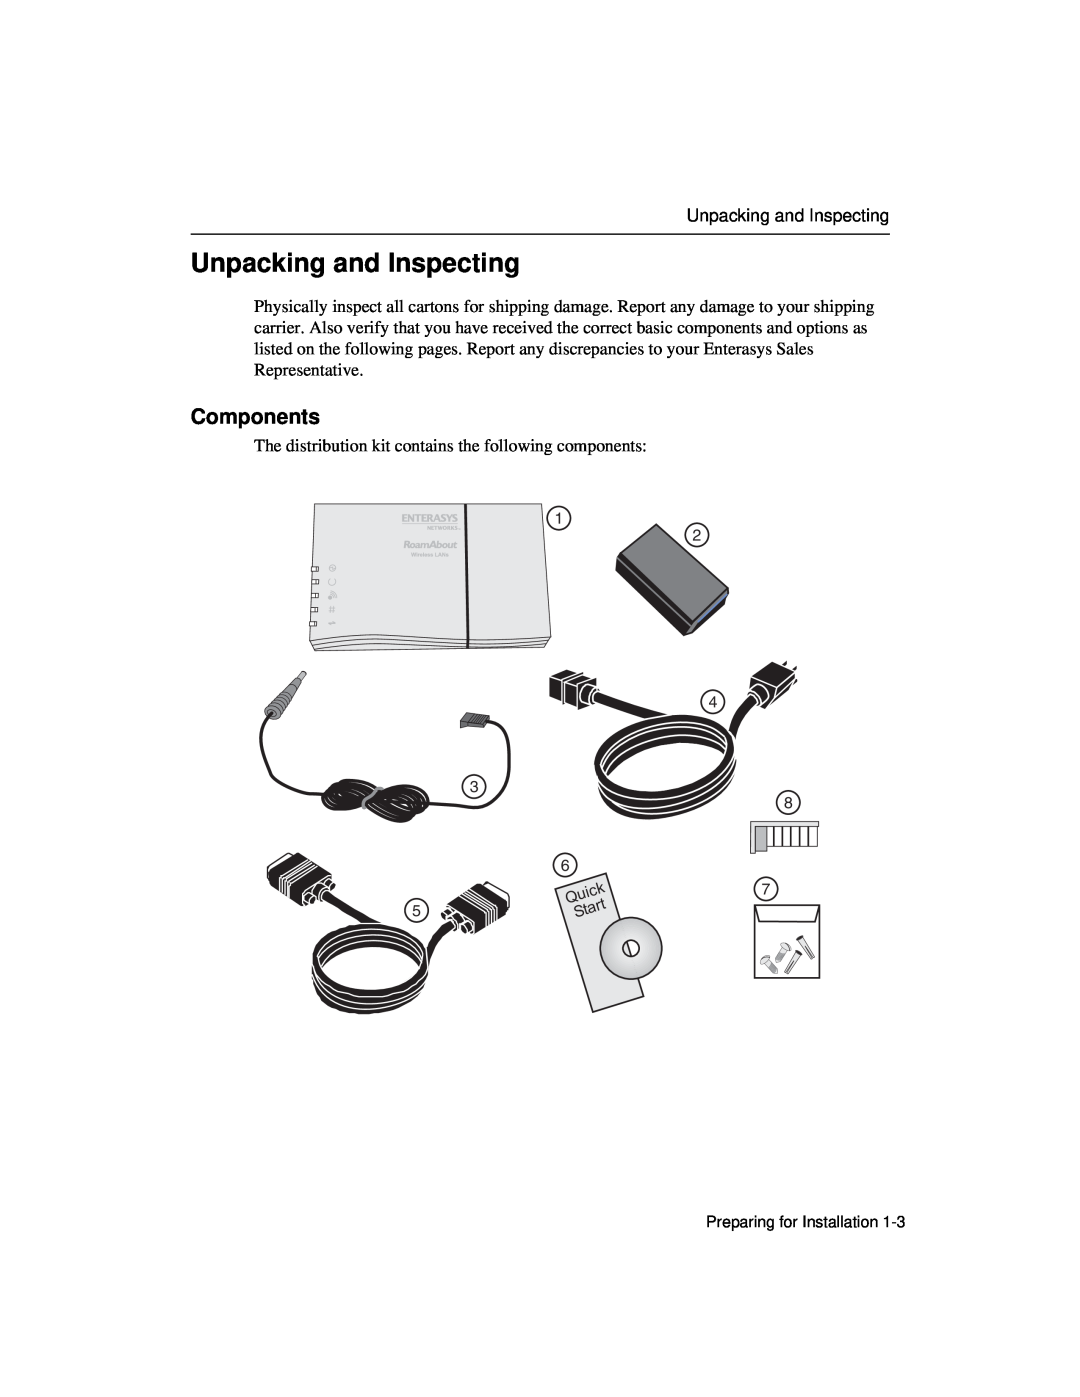 Enterasys Networks Wireless Ethernet Adapter I manual Unpacking and Inspecting, Components 